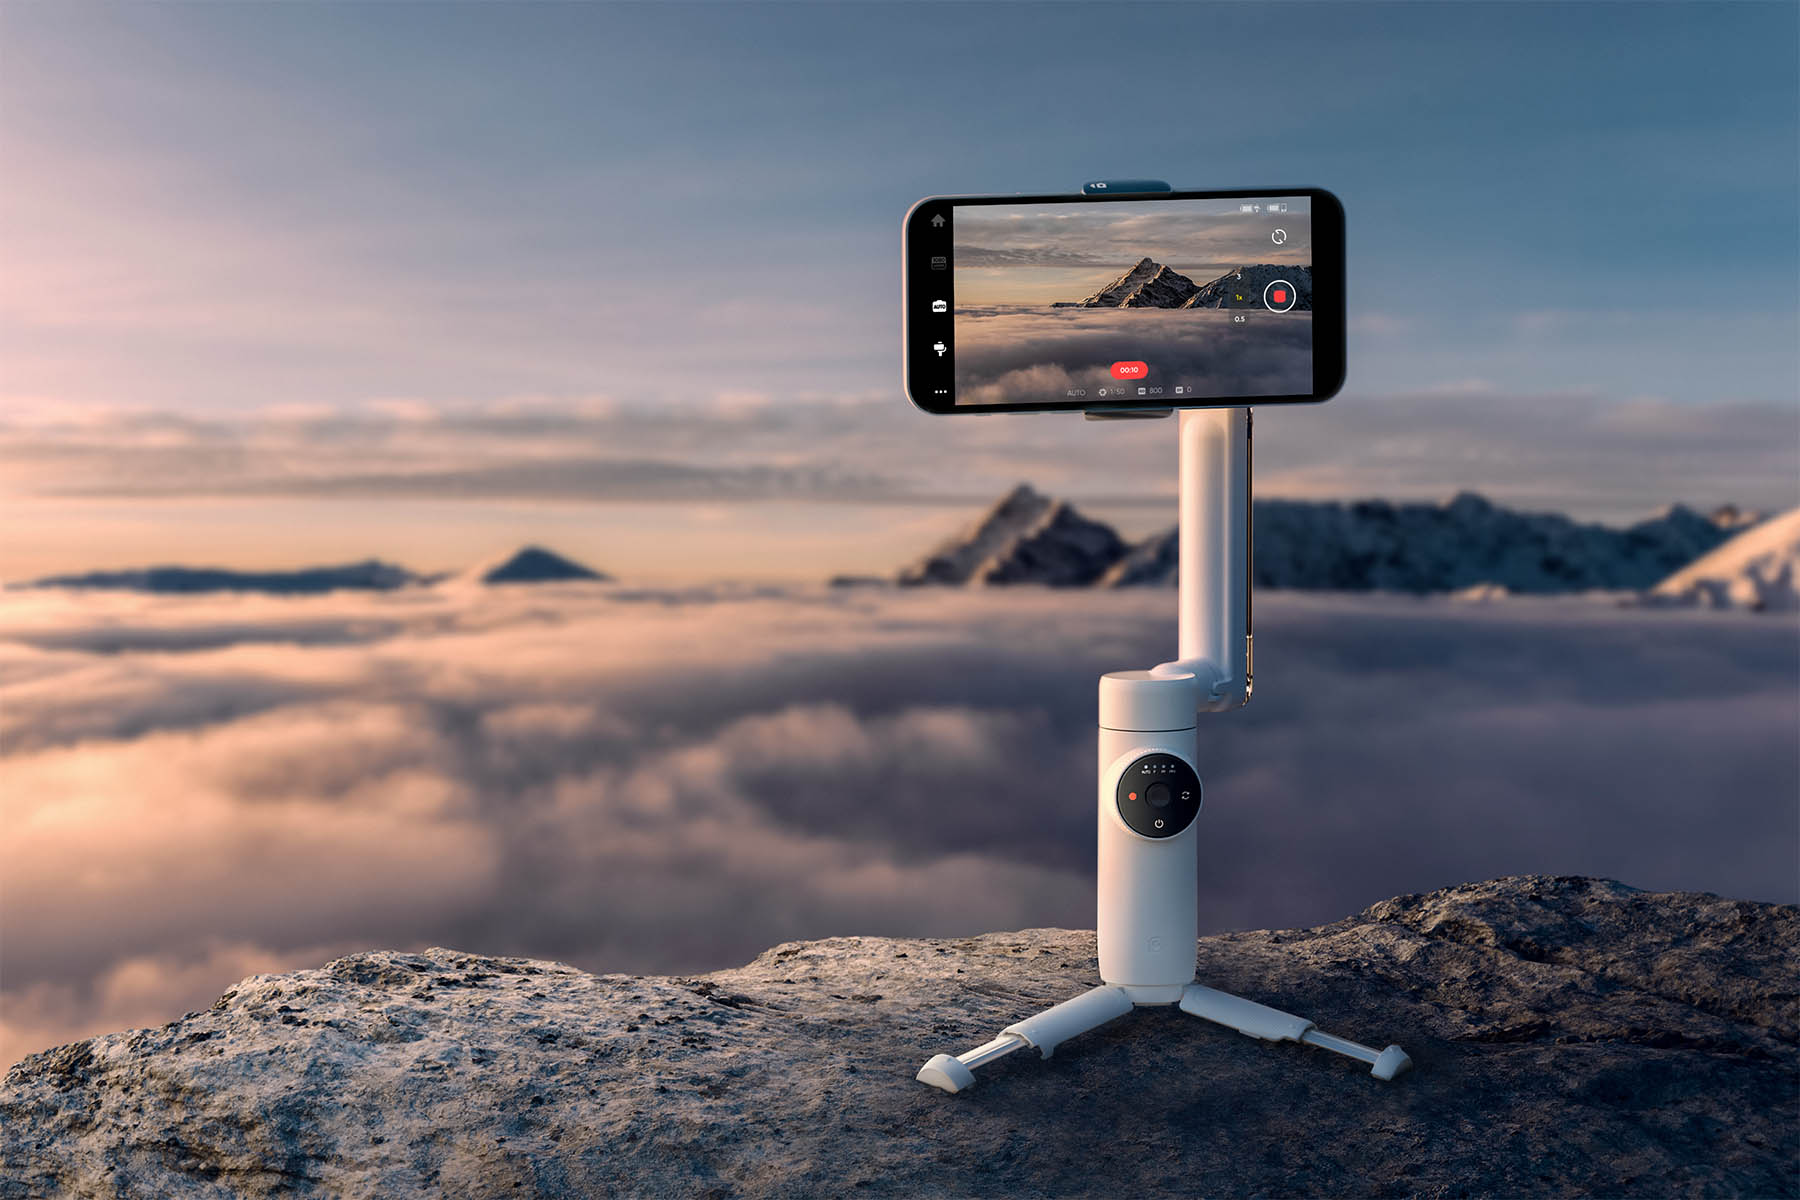  Insta360 Flow Gimbal Stabilizer for Smartphone, AI-Powered  Gimbal, 3-Axis Stabilization, Built-in Tripod, Portable & Foldable, Auto  Tracking Phone Stabilizer, Video Recording, Summit White : Cell Phones &  Accessories